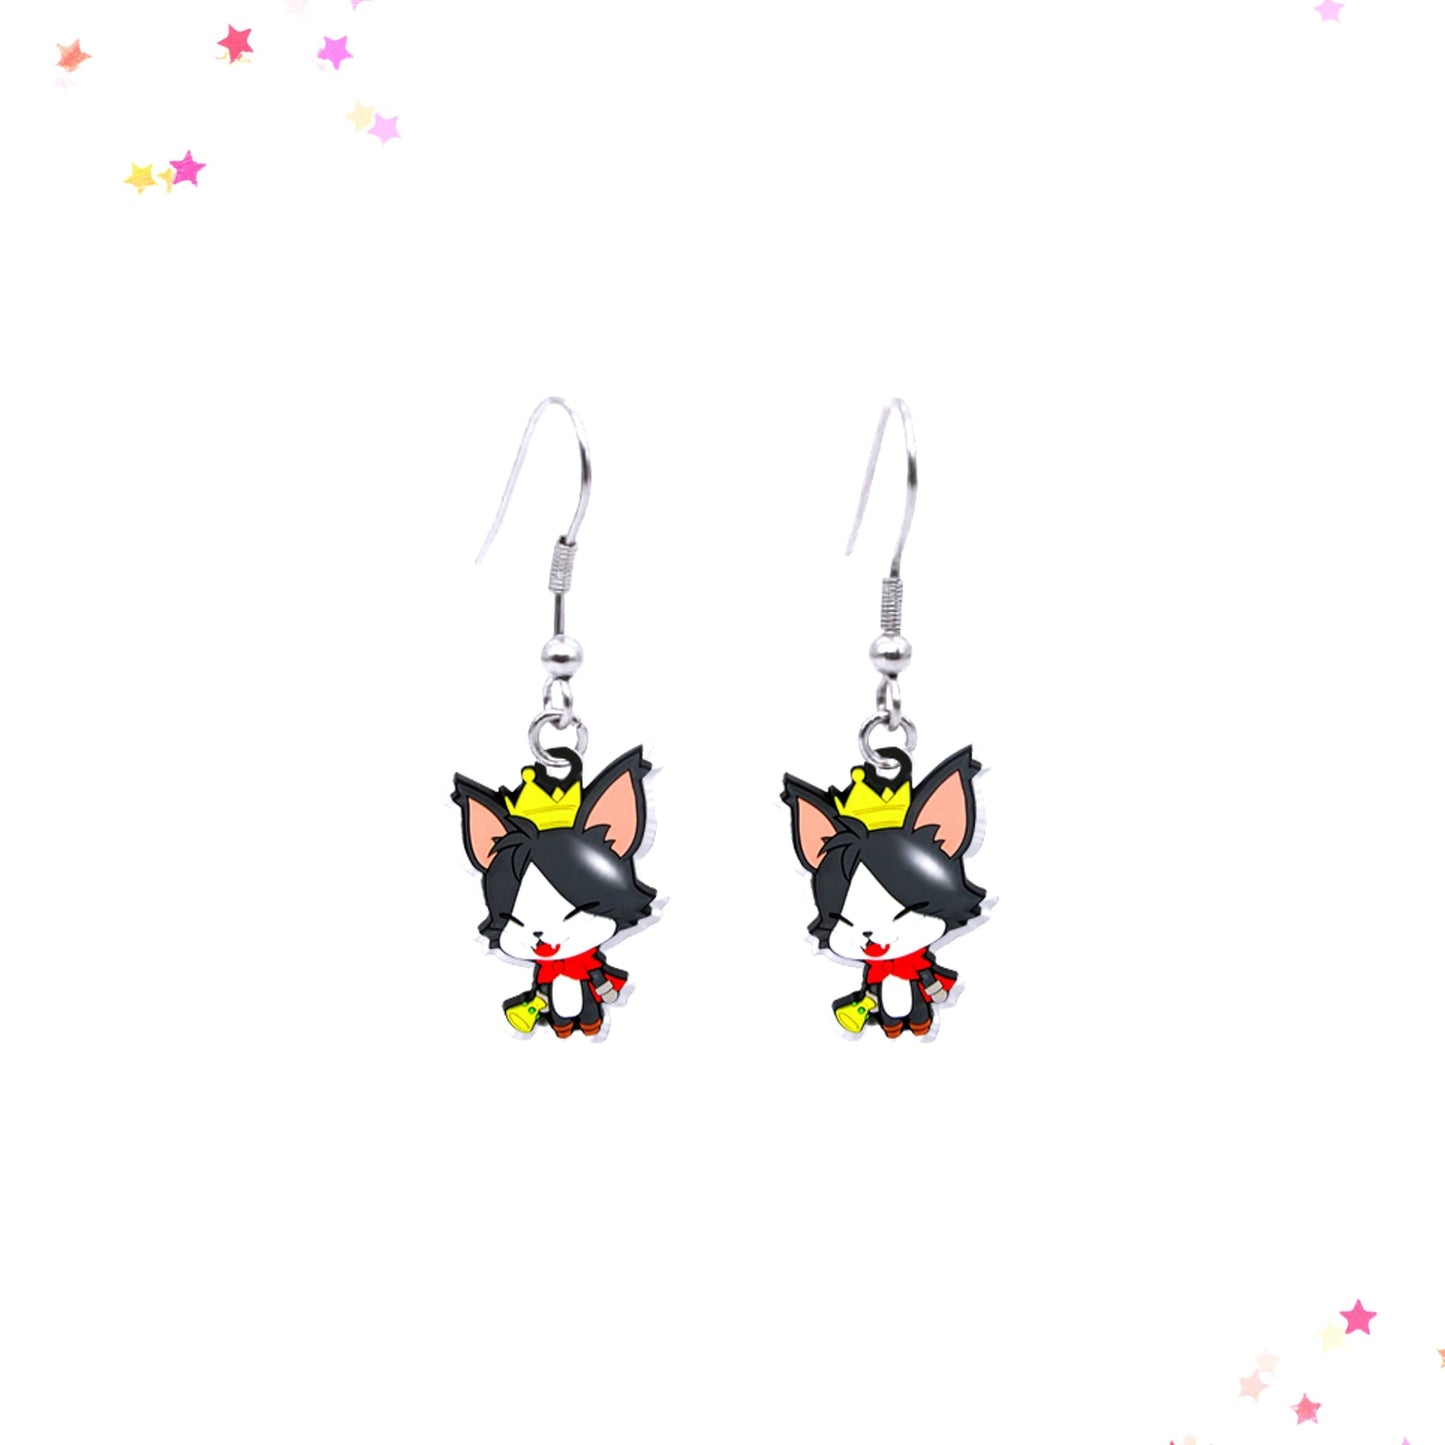 Final Fantasy Cait Sith Acrylic Earrings from Confetti Kitty, Only 7.99